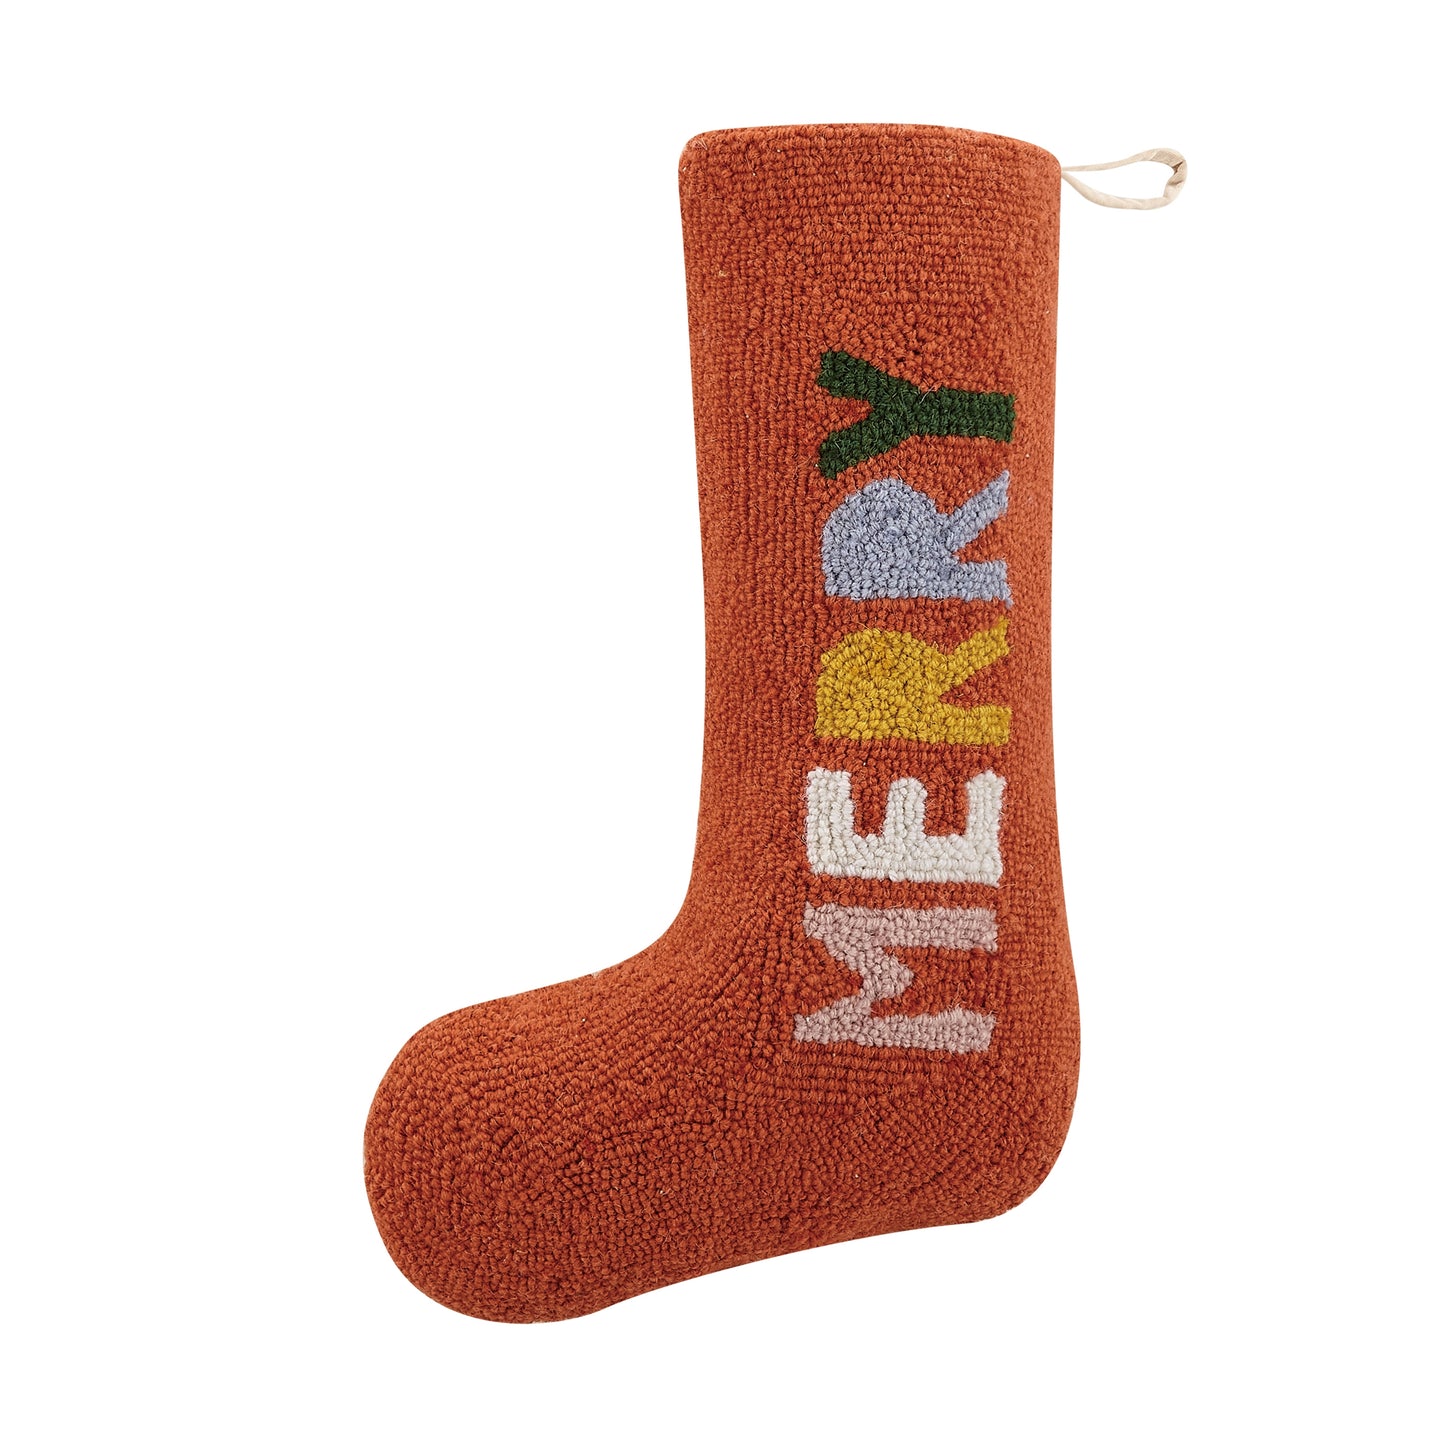 Merry Hooked Wool Holiday Stocking